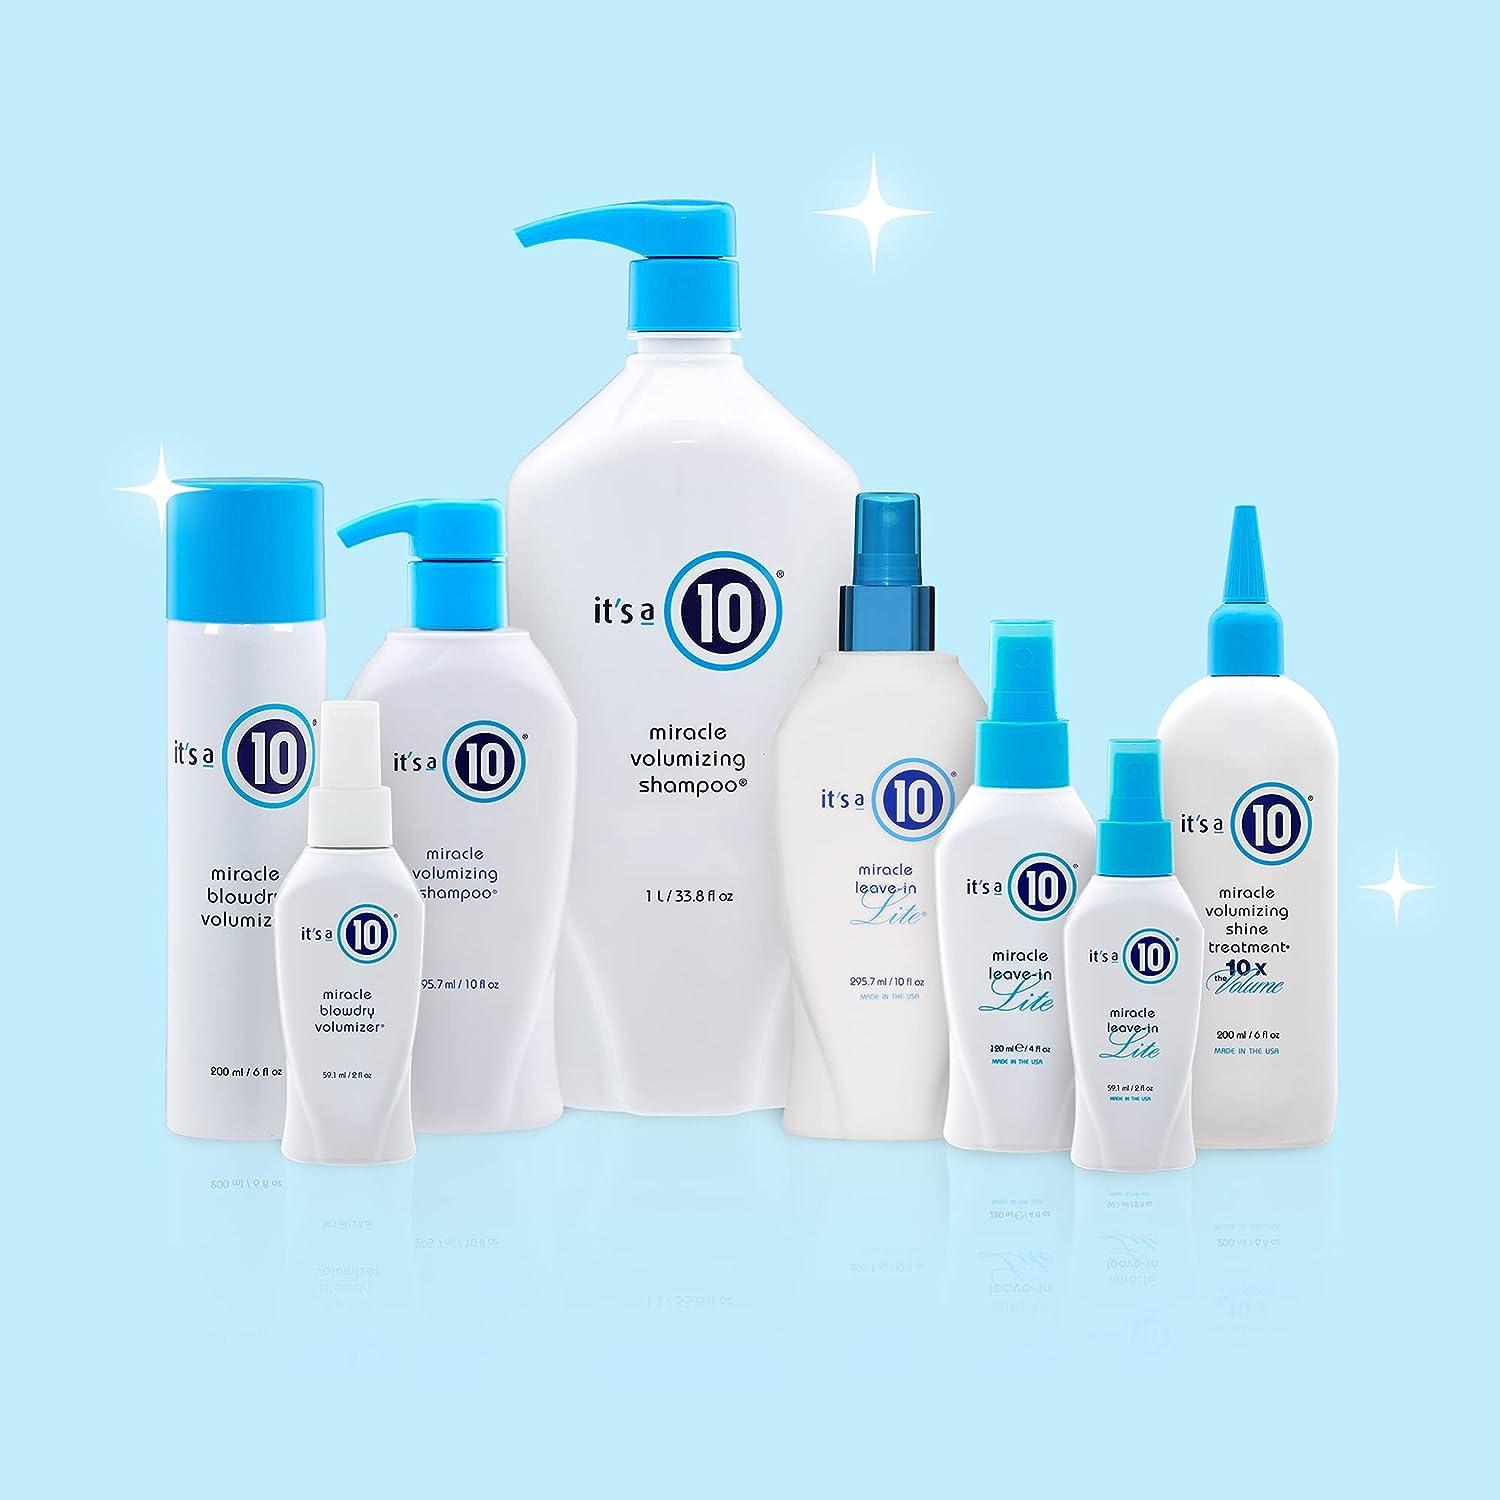 It's a 10 Haircare Miracle Leave-In Product, 4 fl. oz.